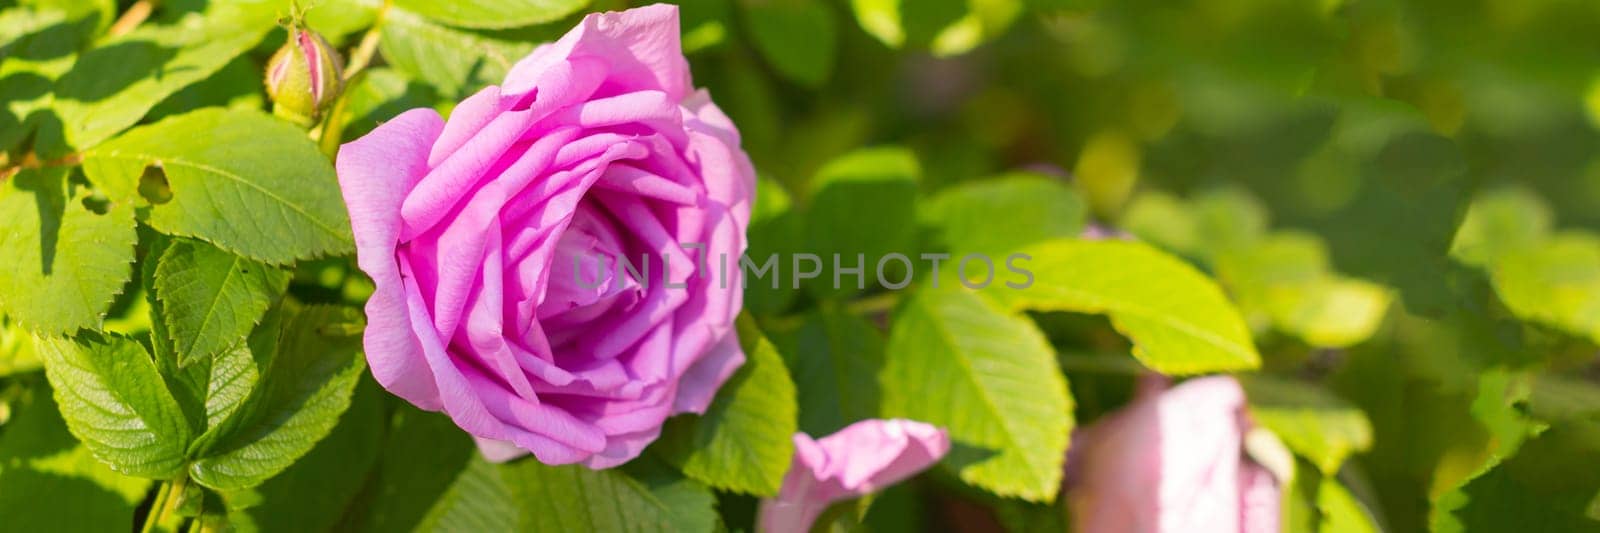 Pink roses in the garden blooming. gentle pink rose on green leaves background. Greeting card.